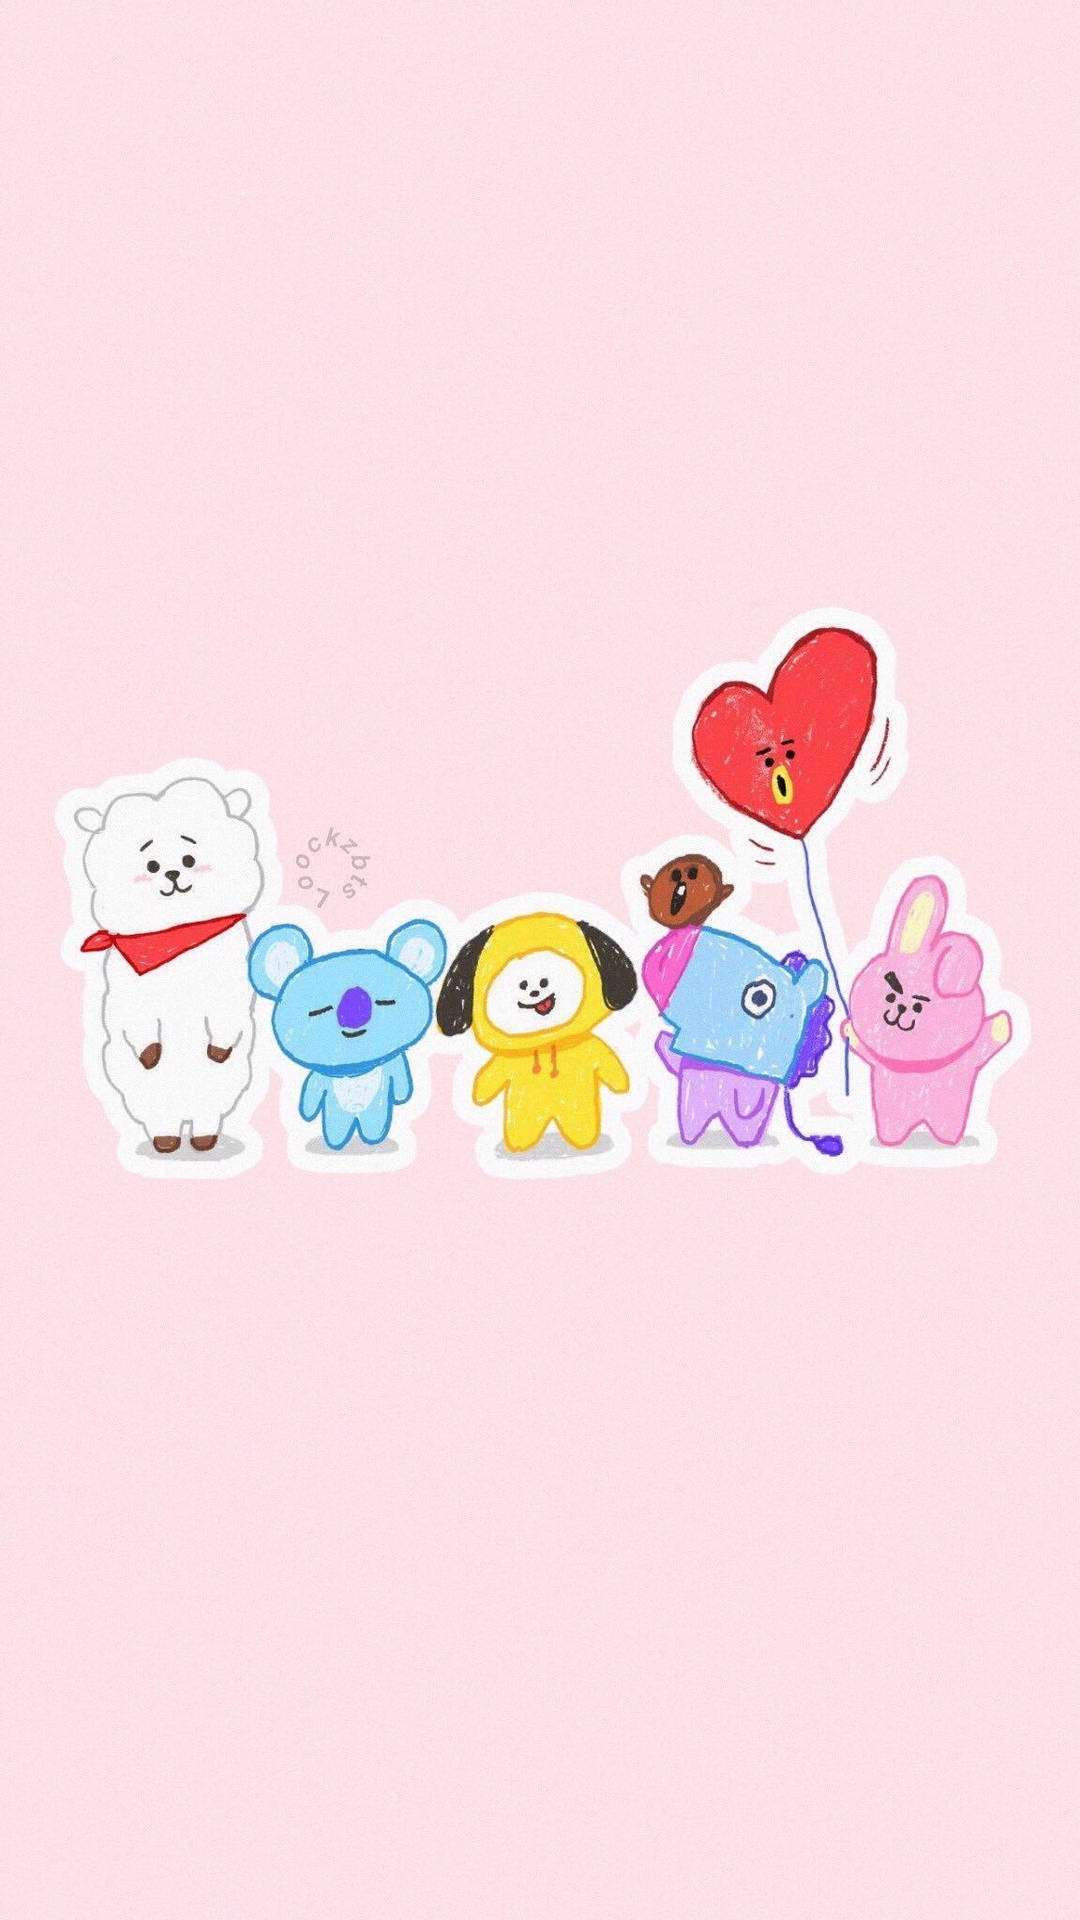 Bts Is Here To Brighten Up Your Day With Bt21 Wallpaper